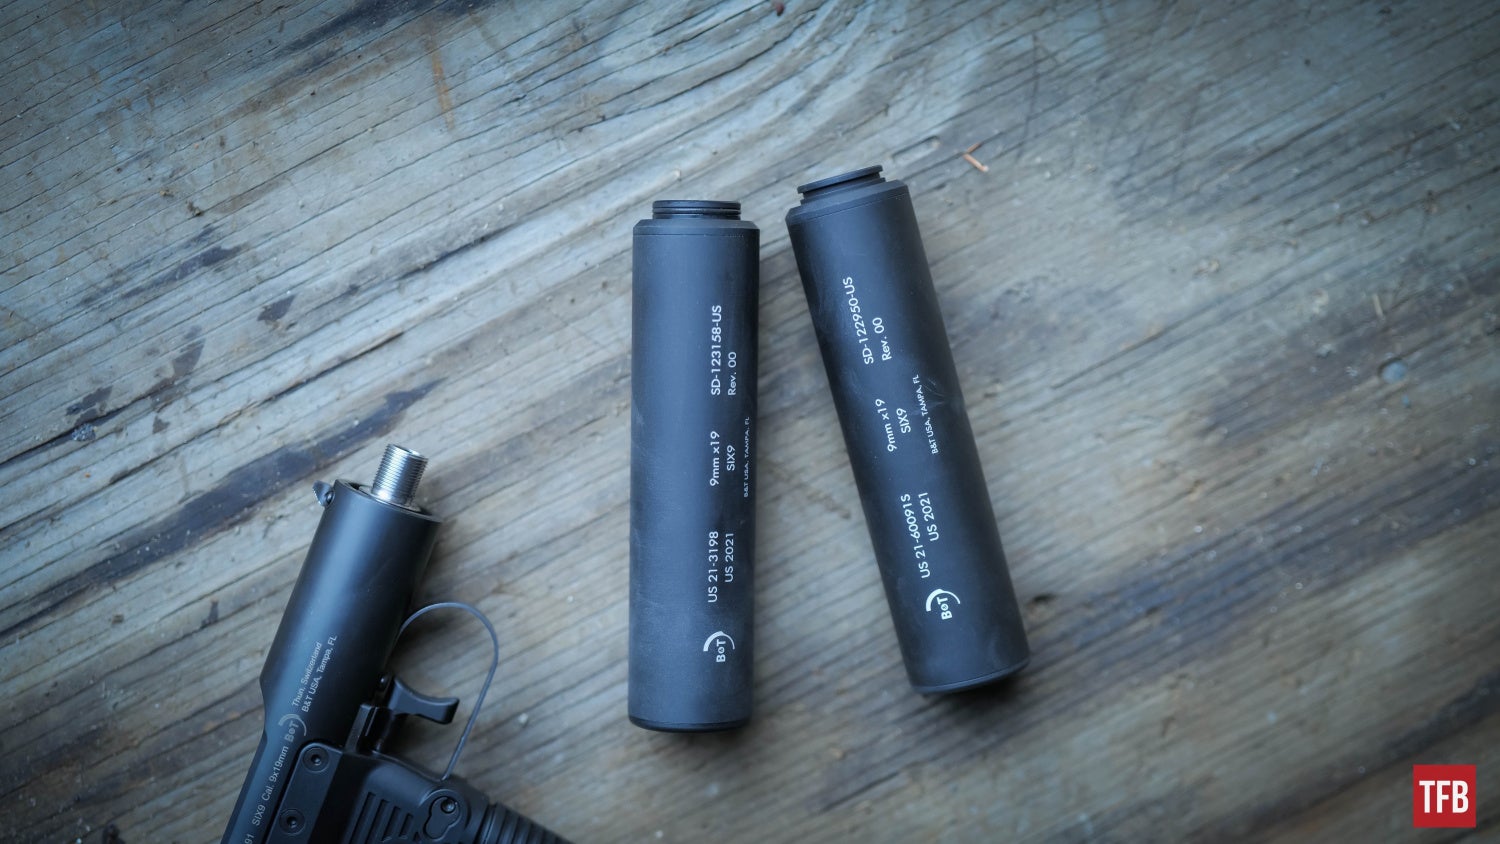 SILENCER SATURDAY #216: The B&T USA STATION SIX Pistol And Suppressors